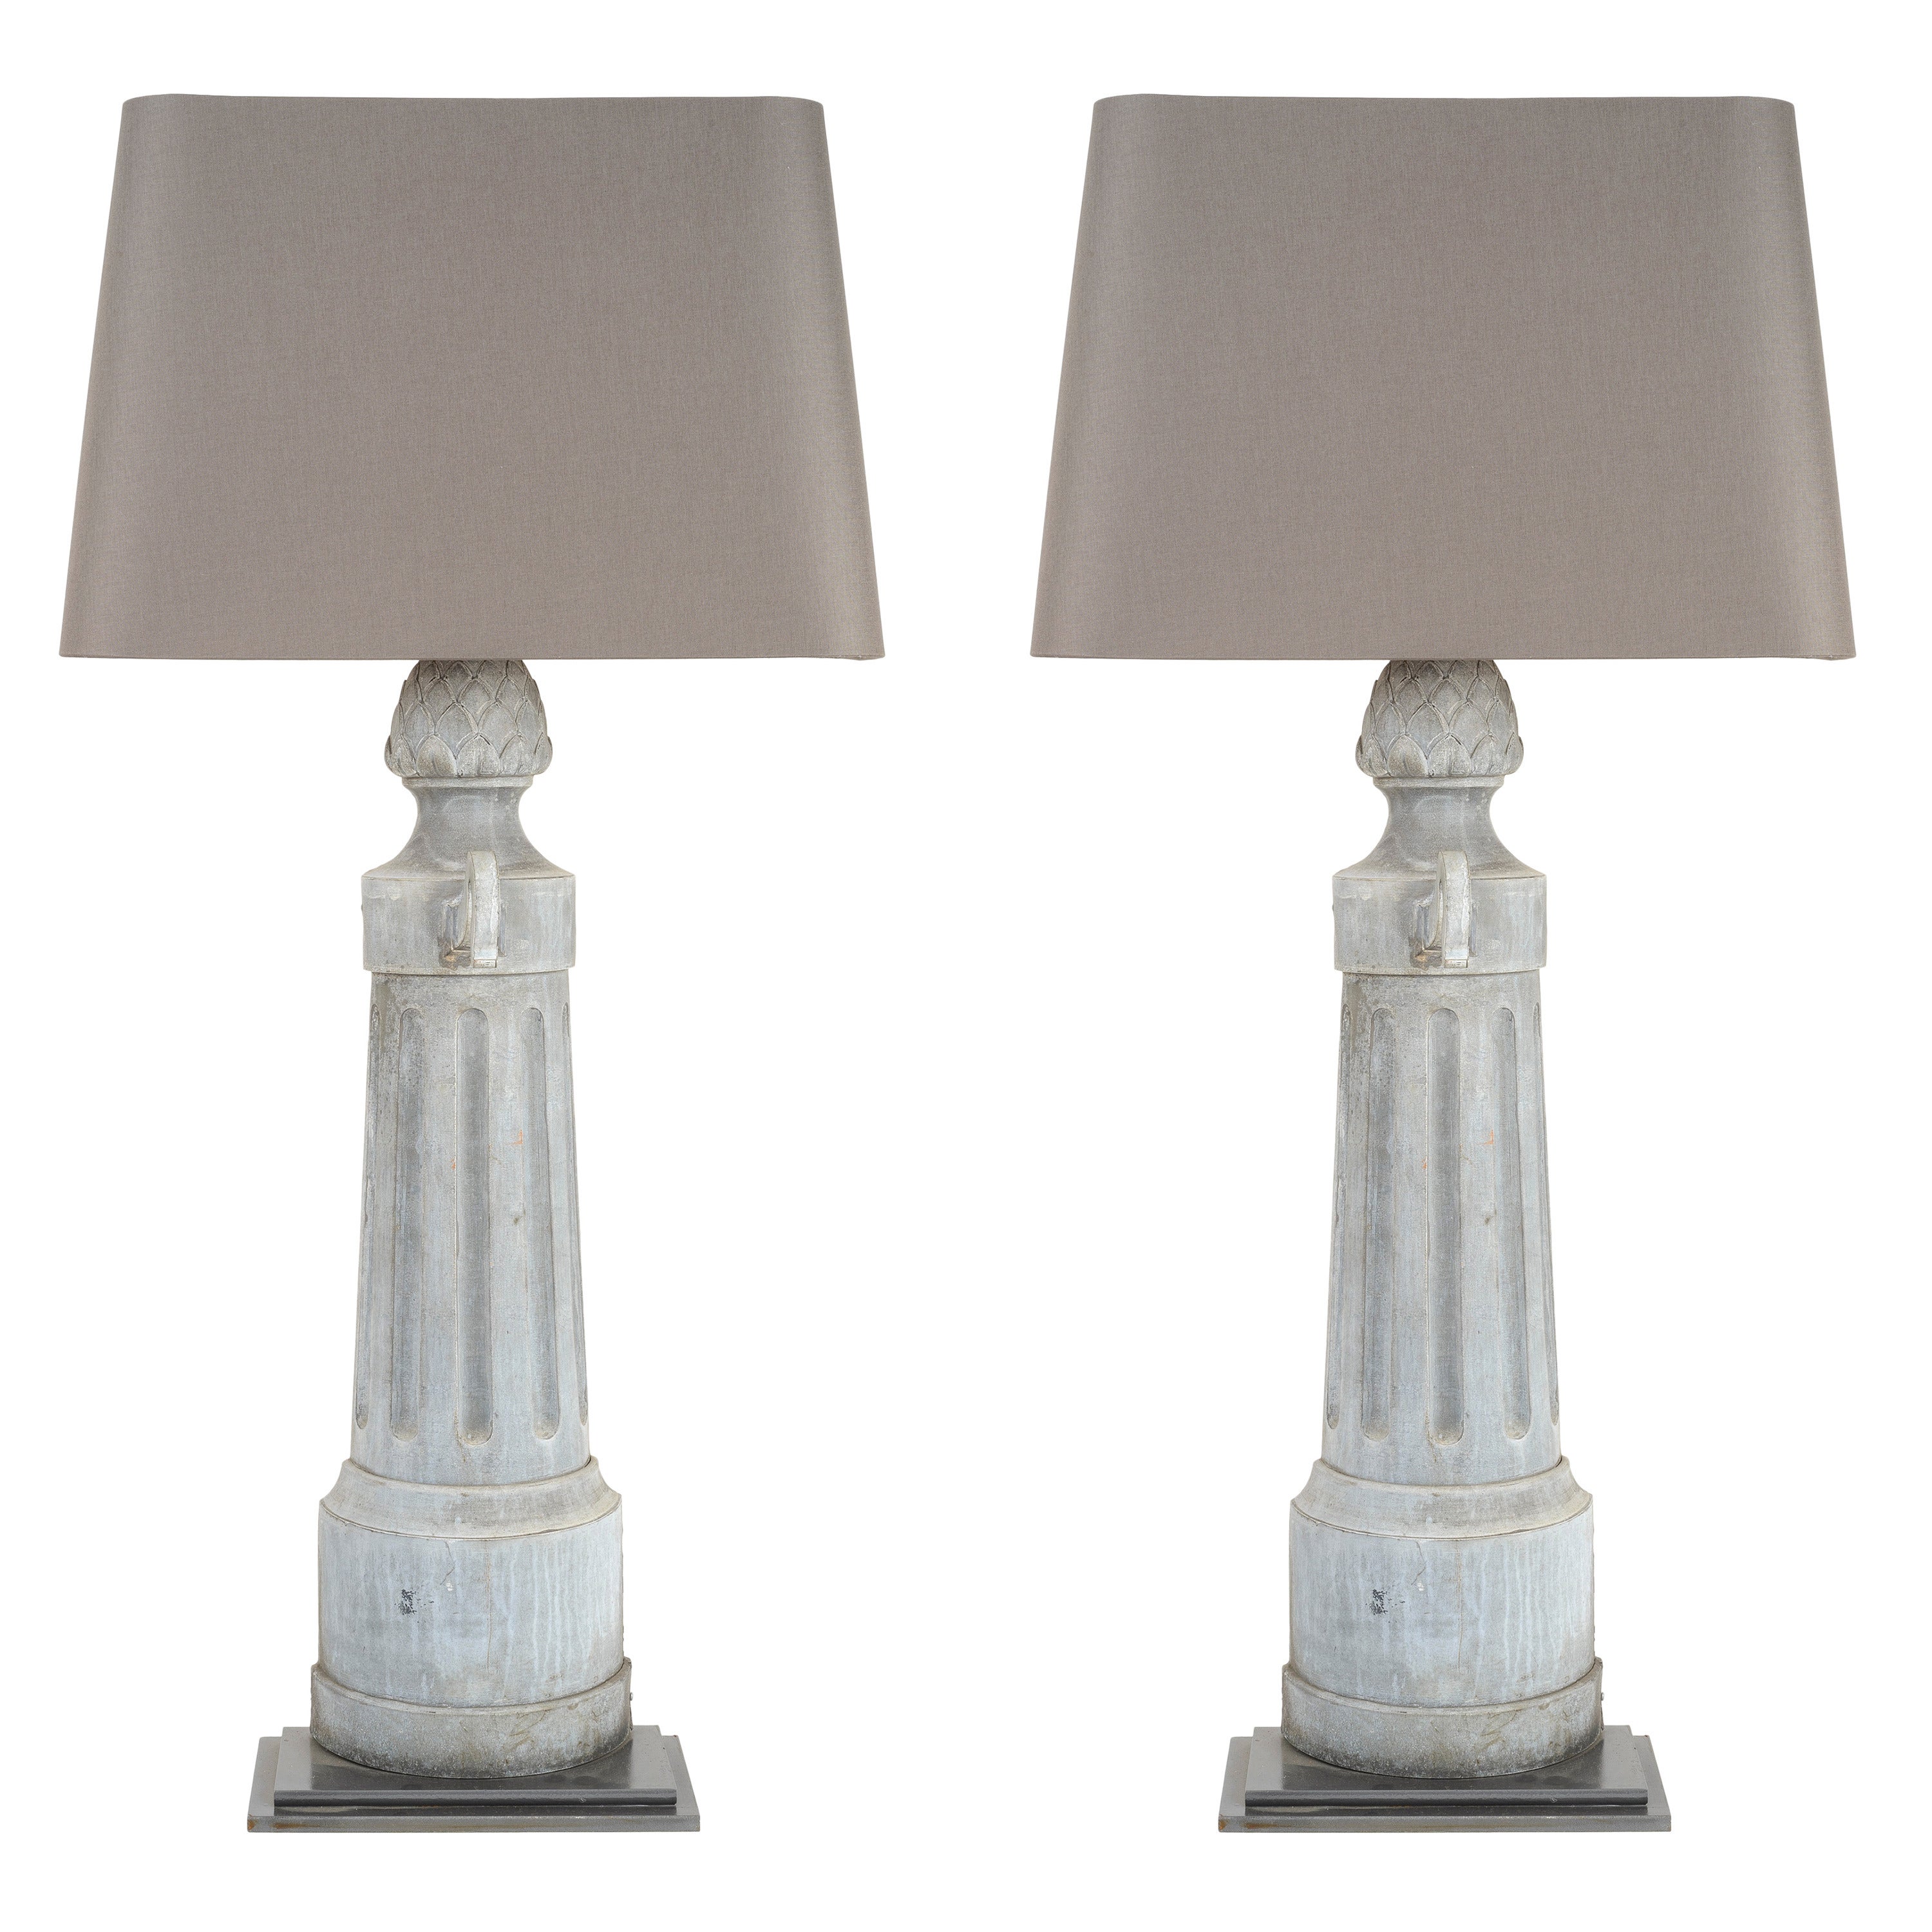 Pair of Tall Metal Lamps with Custom Shade